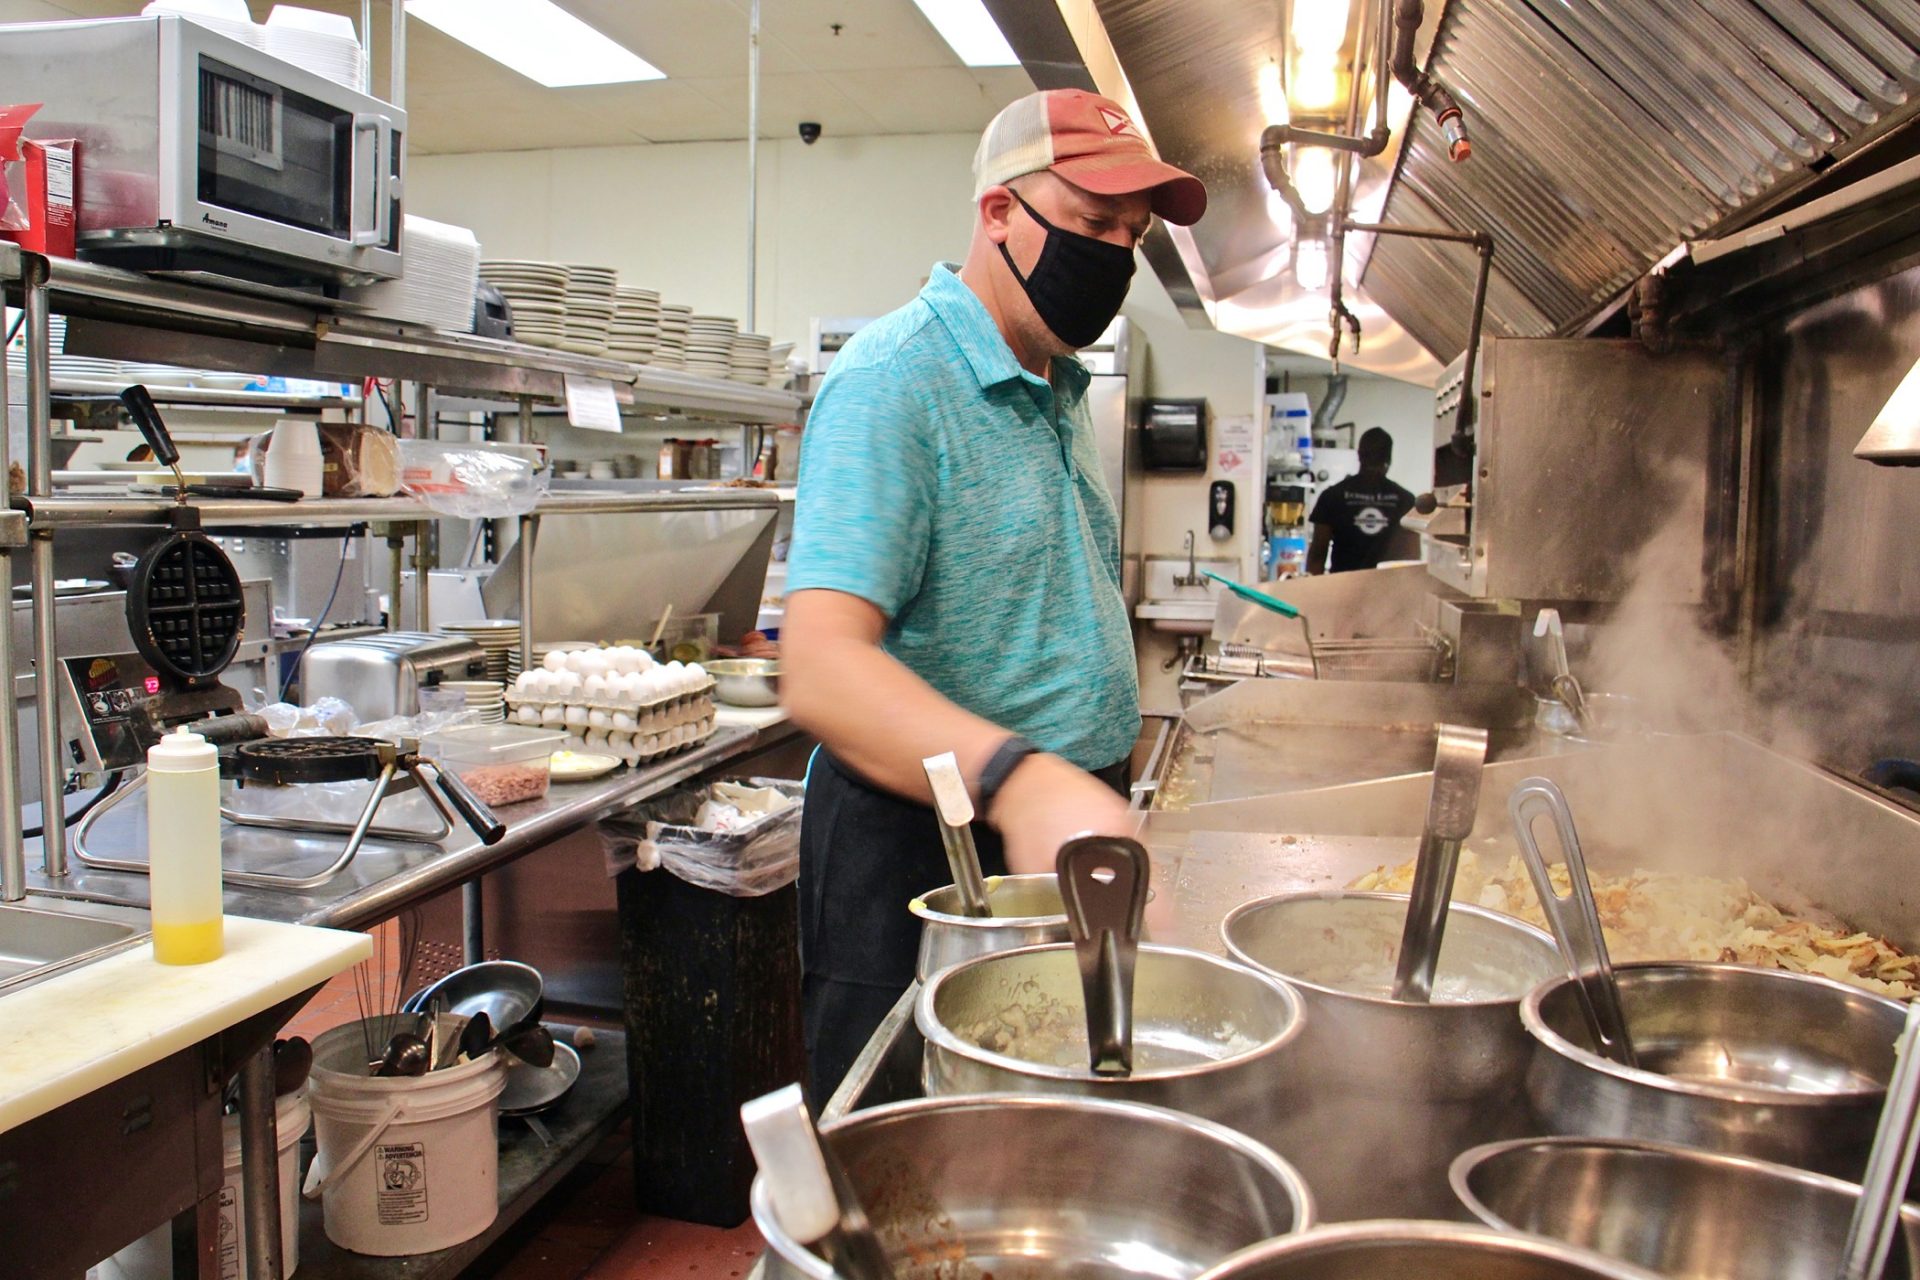 Mike Grafenstine works in the kitchen of his restaurant in Abington, Pa.